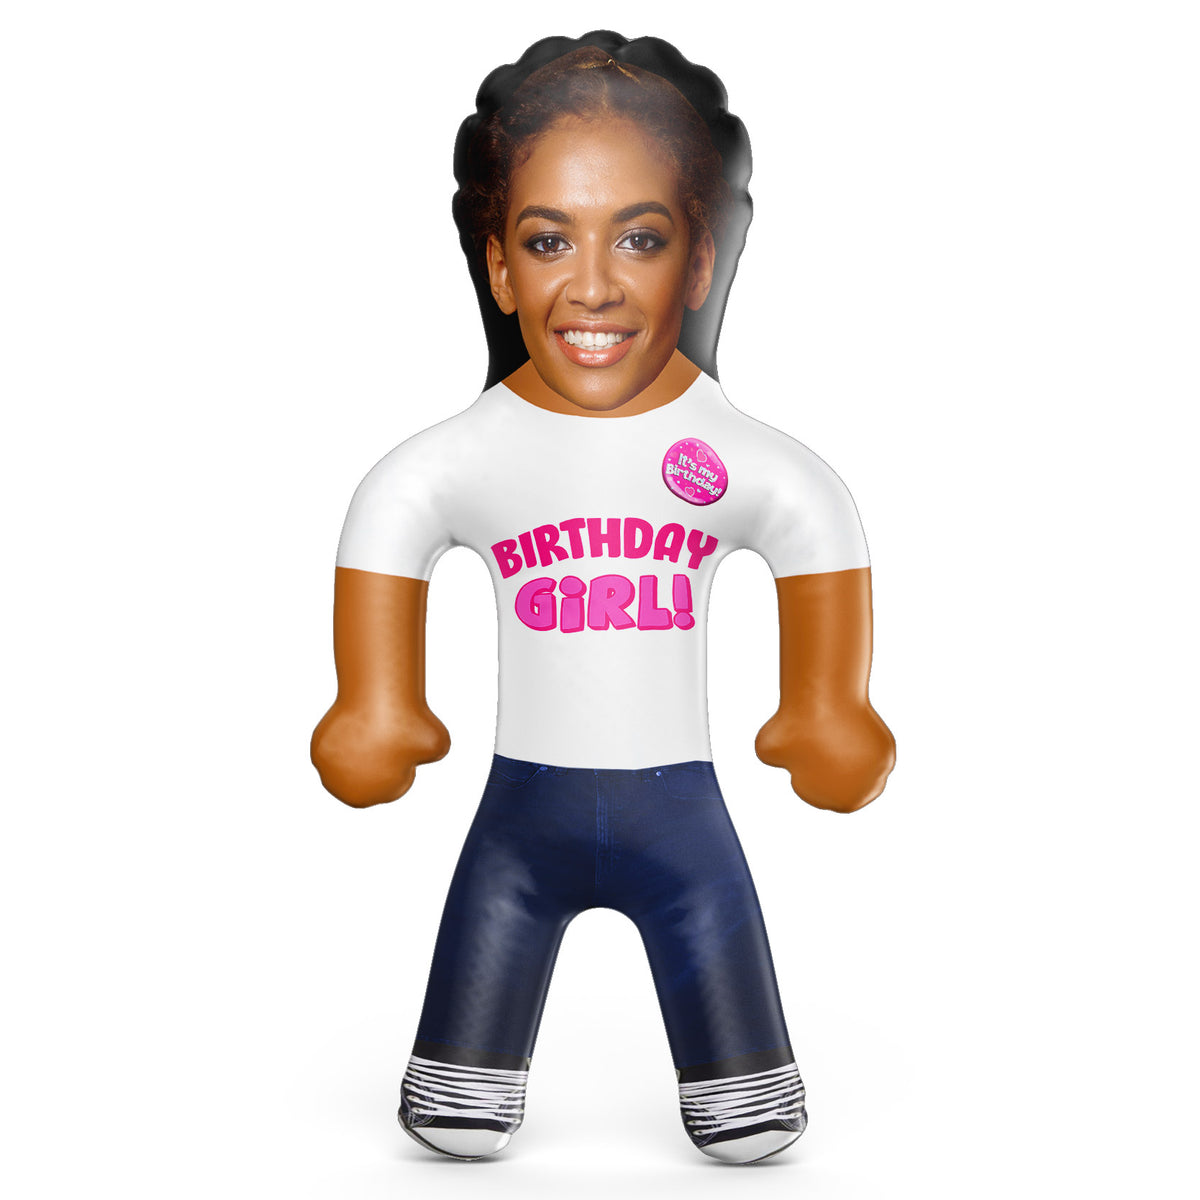 Birthday Girl Inflatable Doll - Girl Blow Up Doll